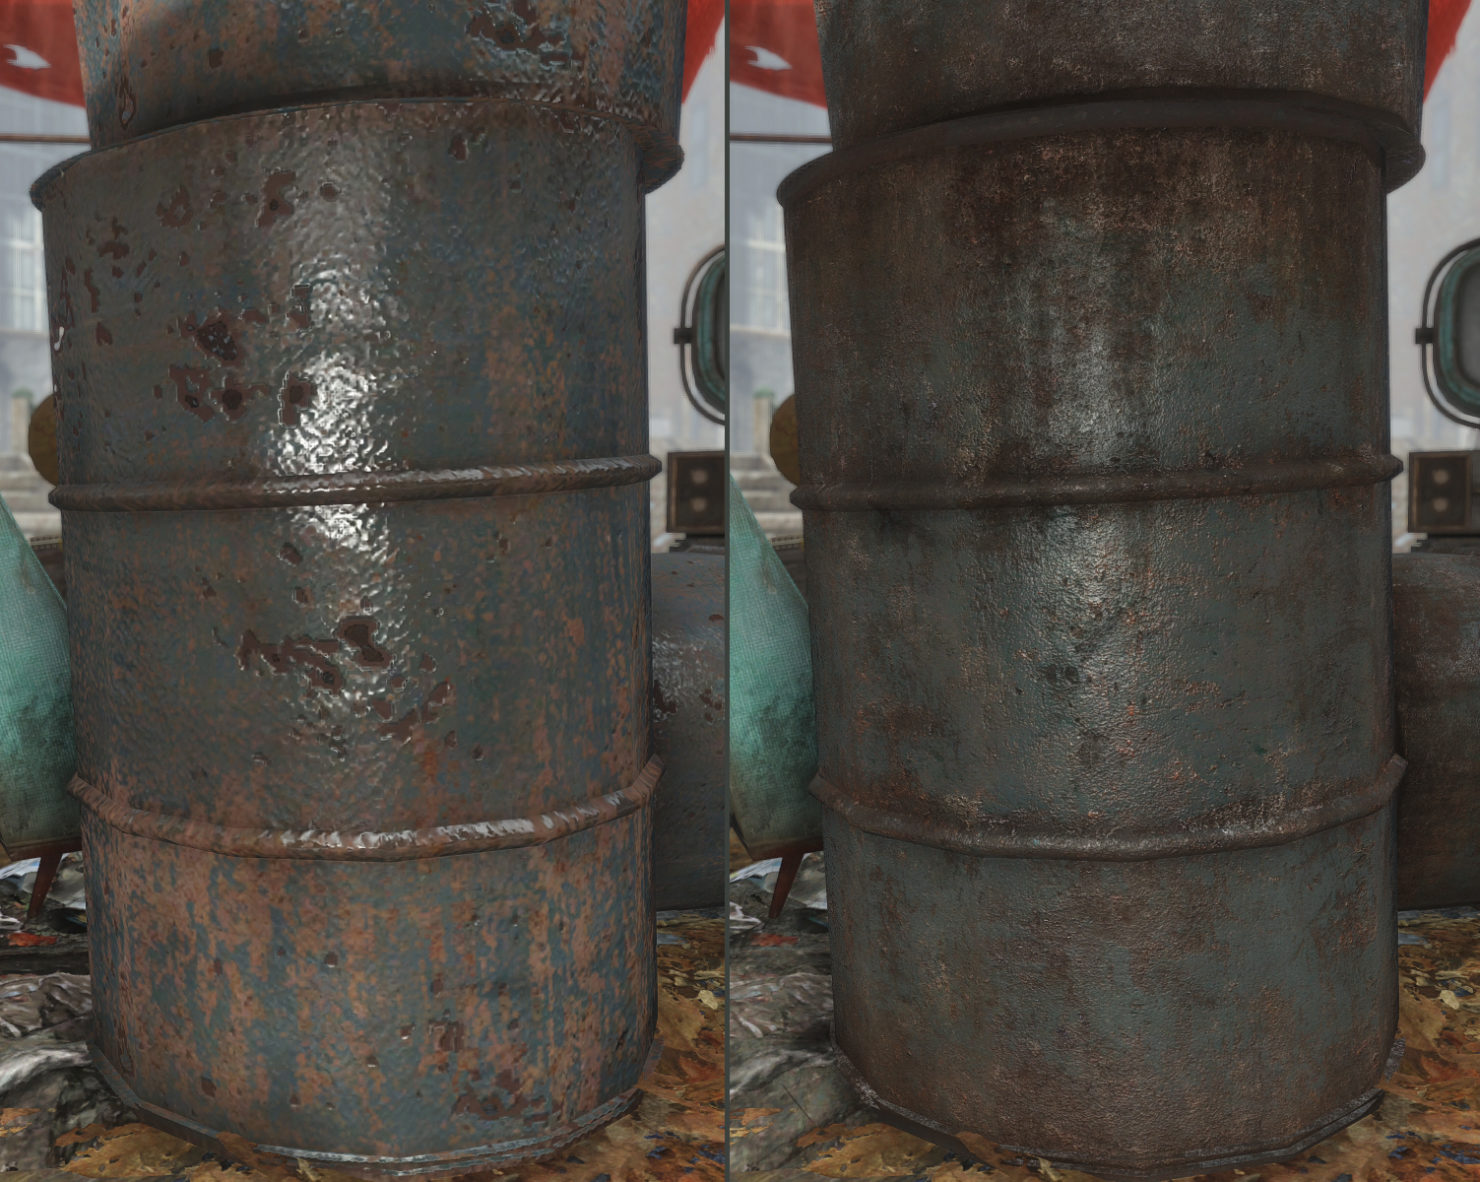 Fallout 4 high resolution texture repack фото 69